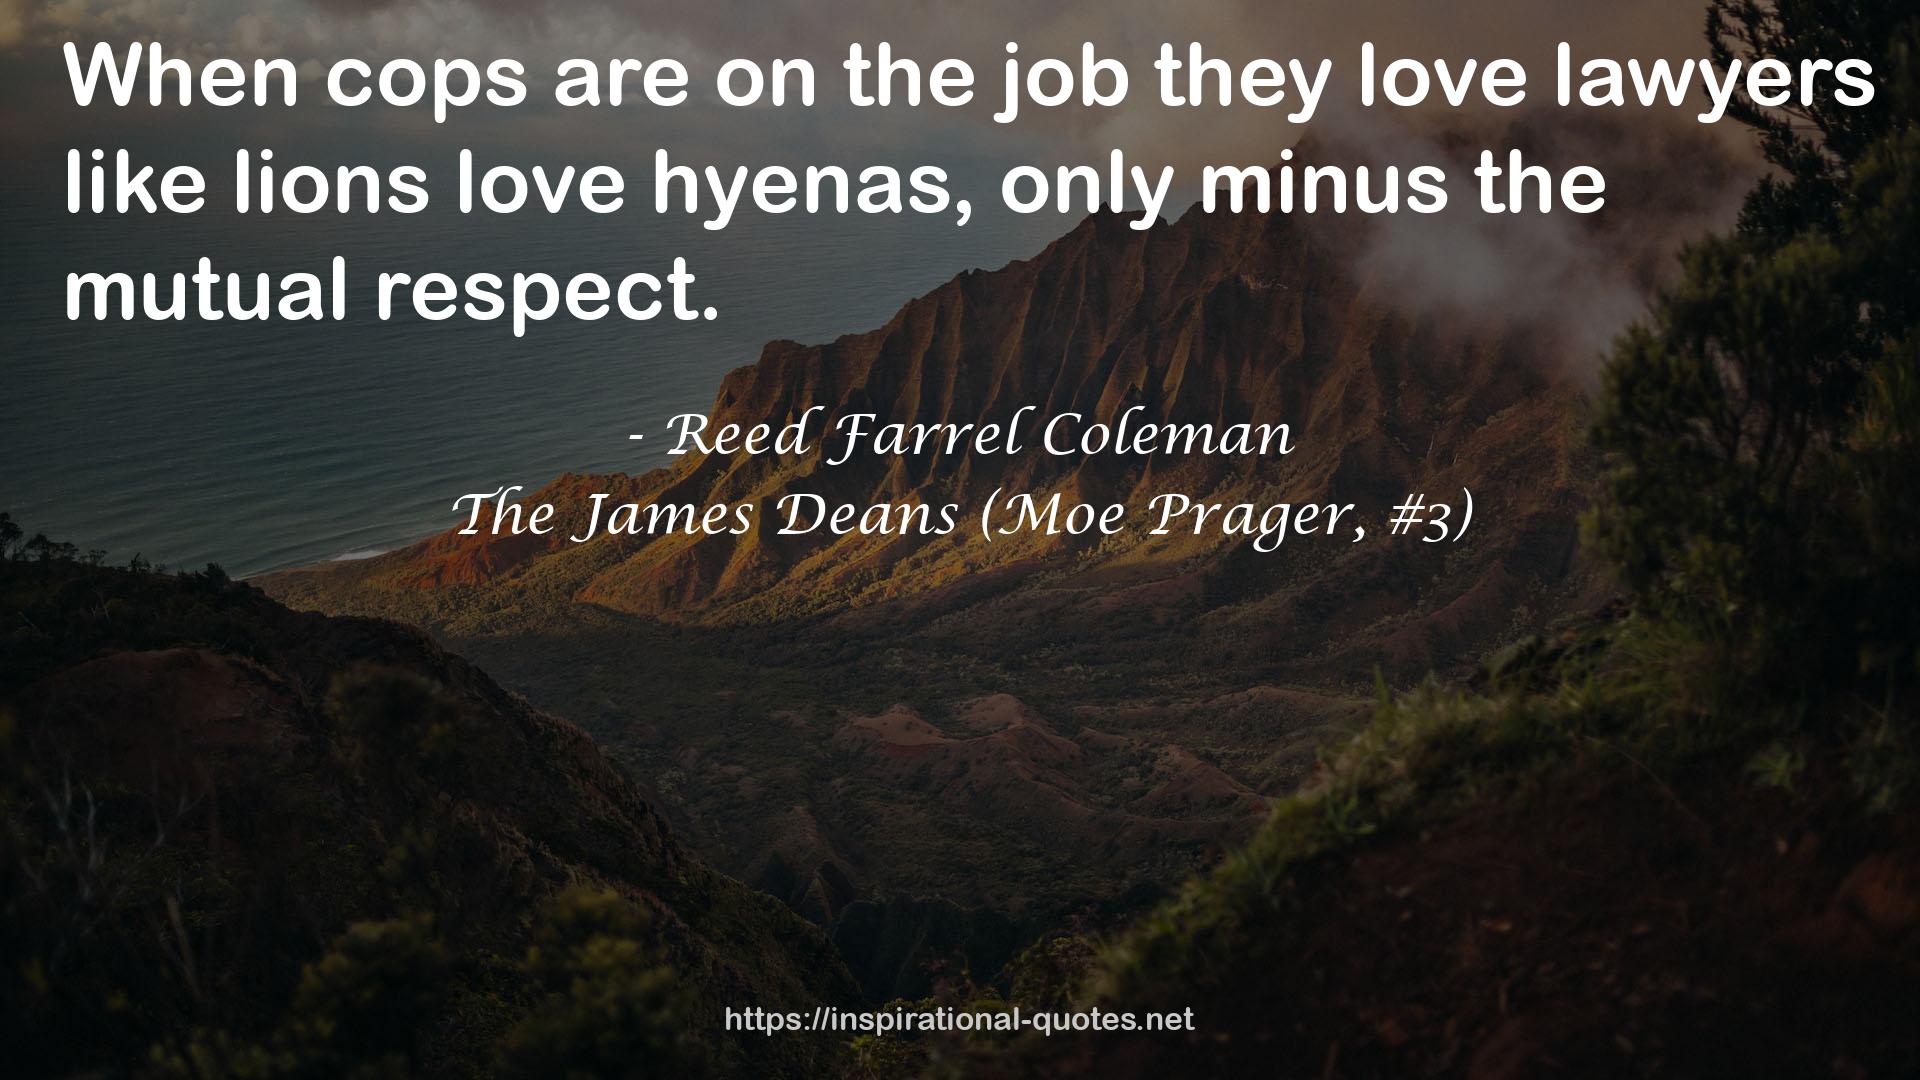 The James Deans (Moe Prager, #3) QUOTES